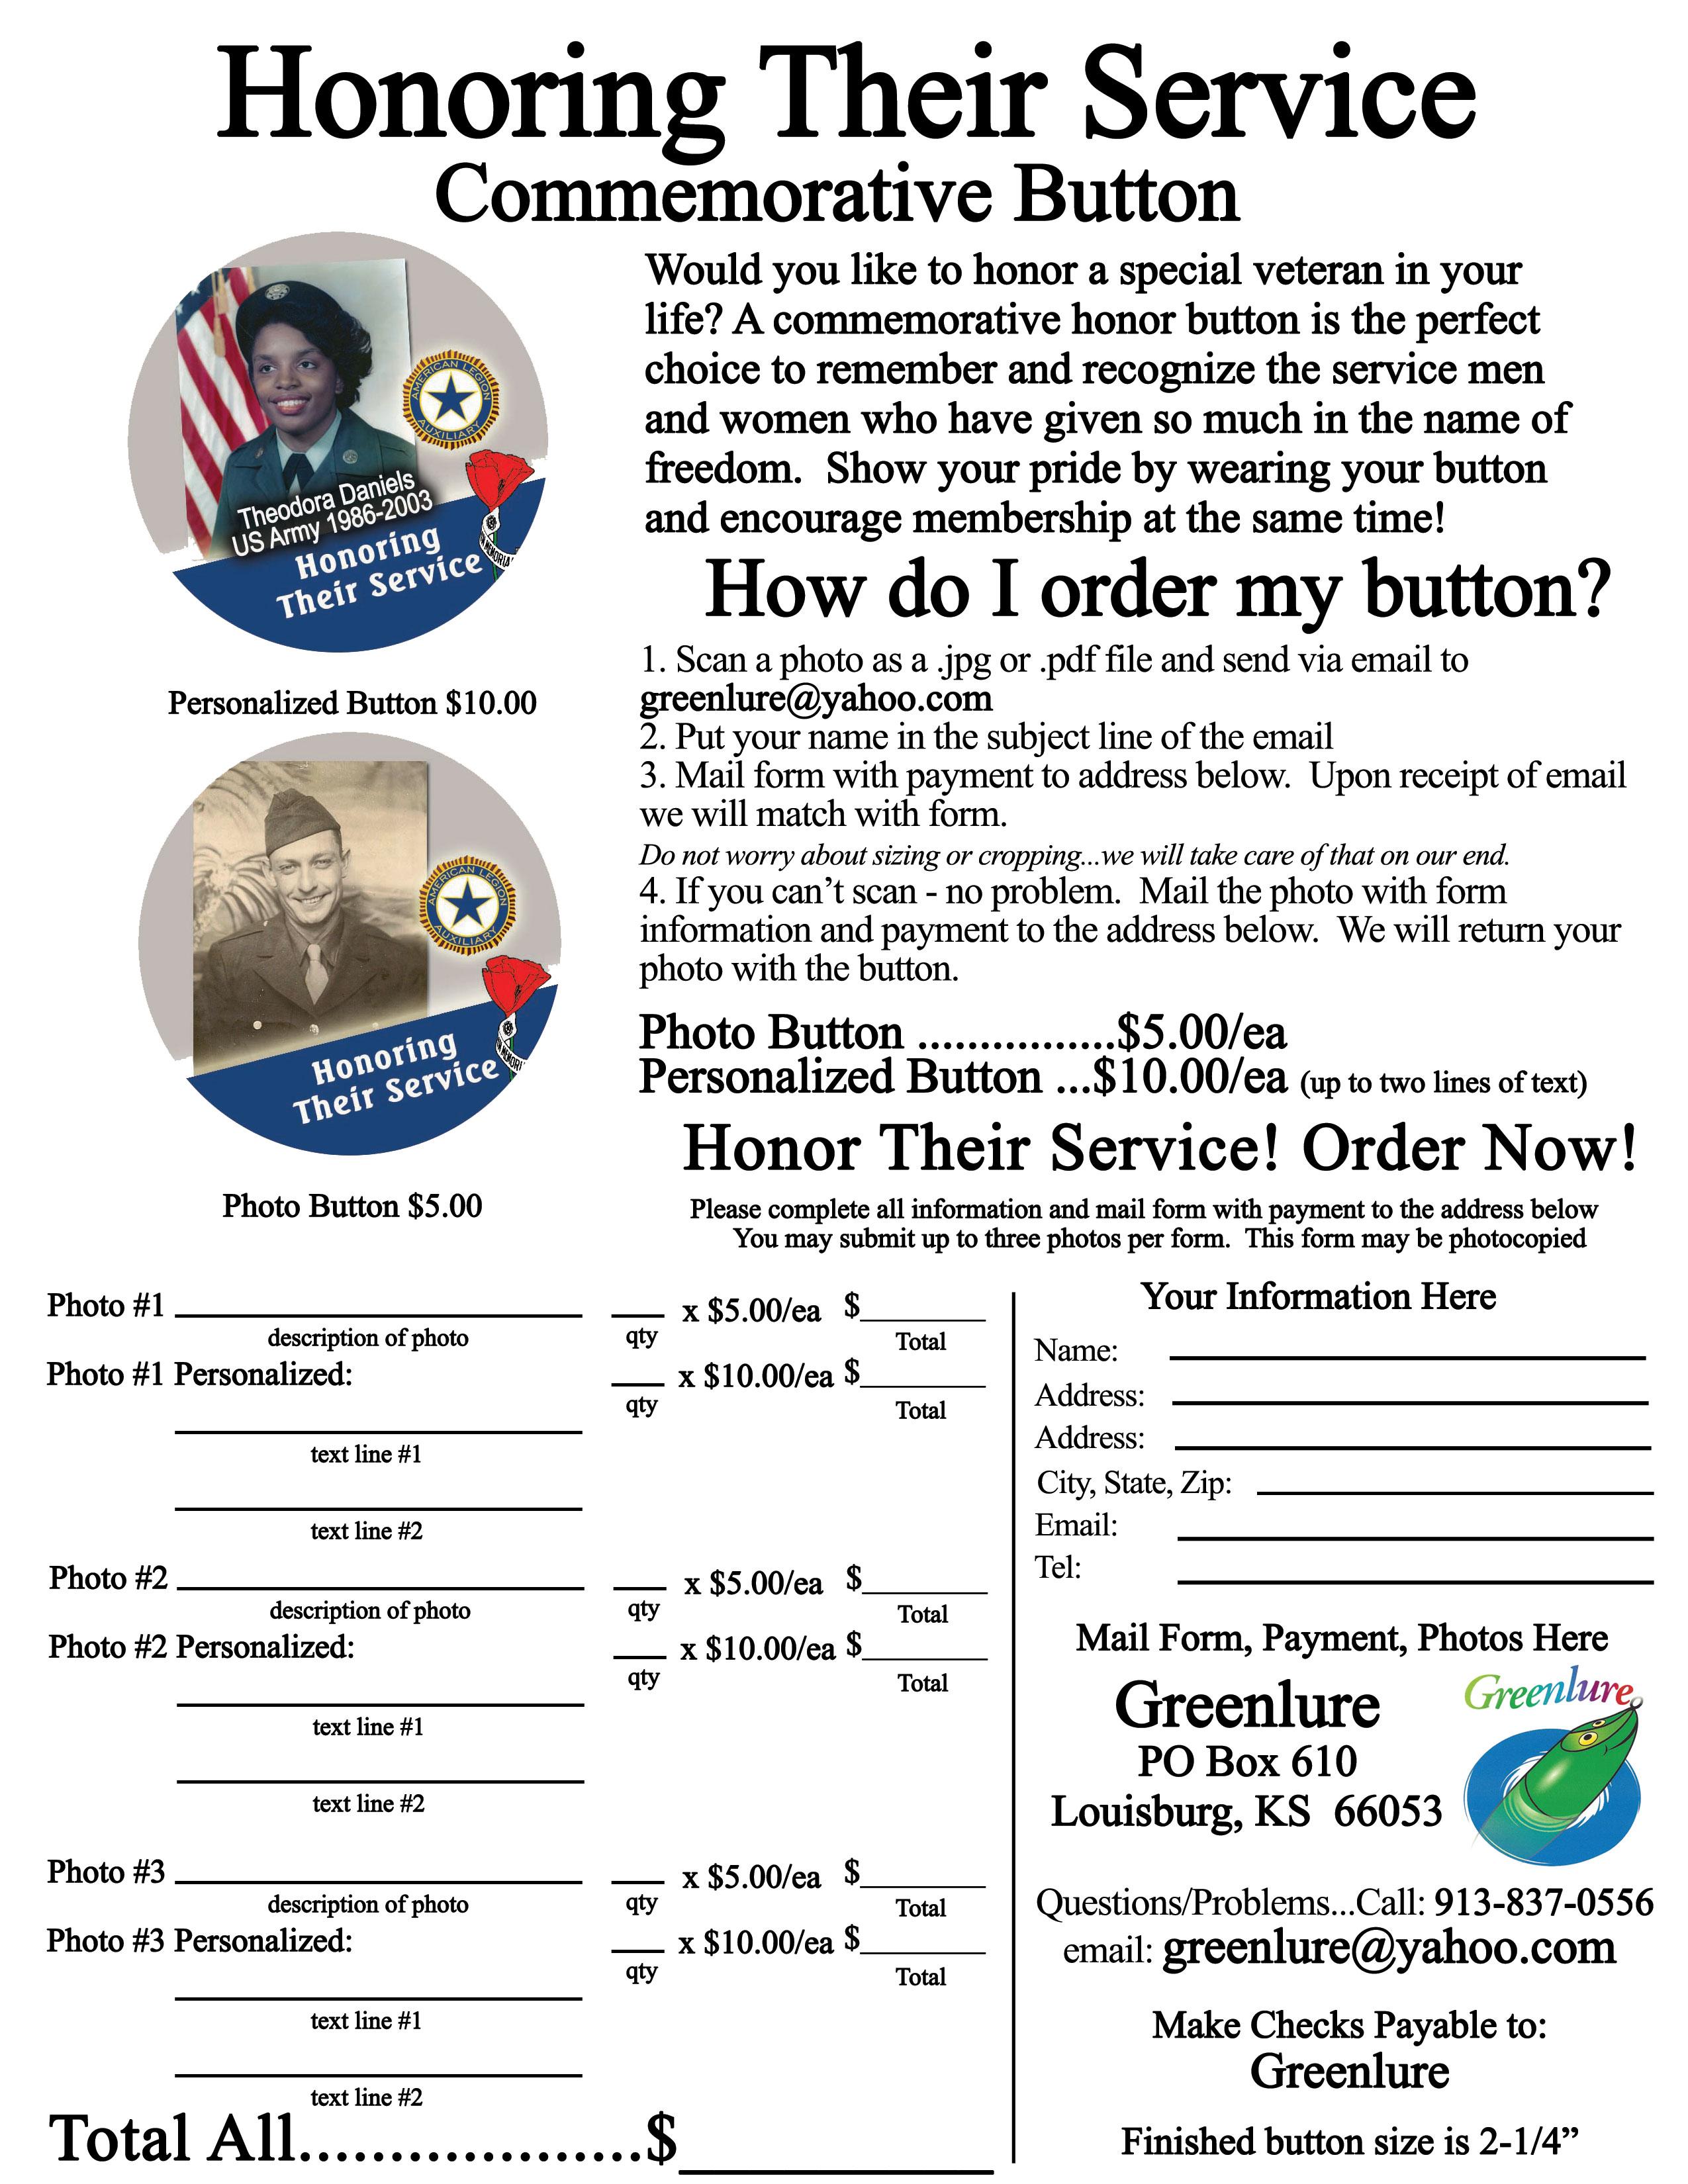 Right Click and Download Image to Save and Print the Order Form